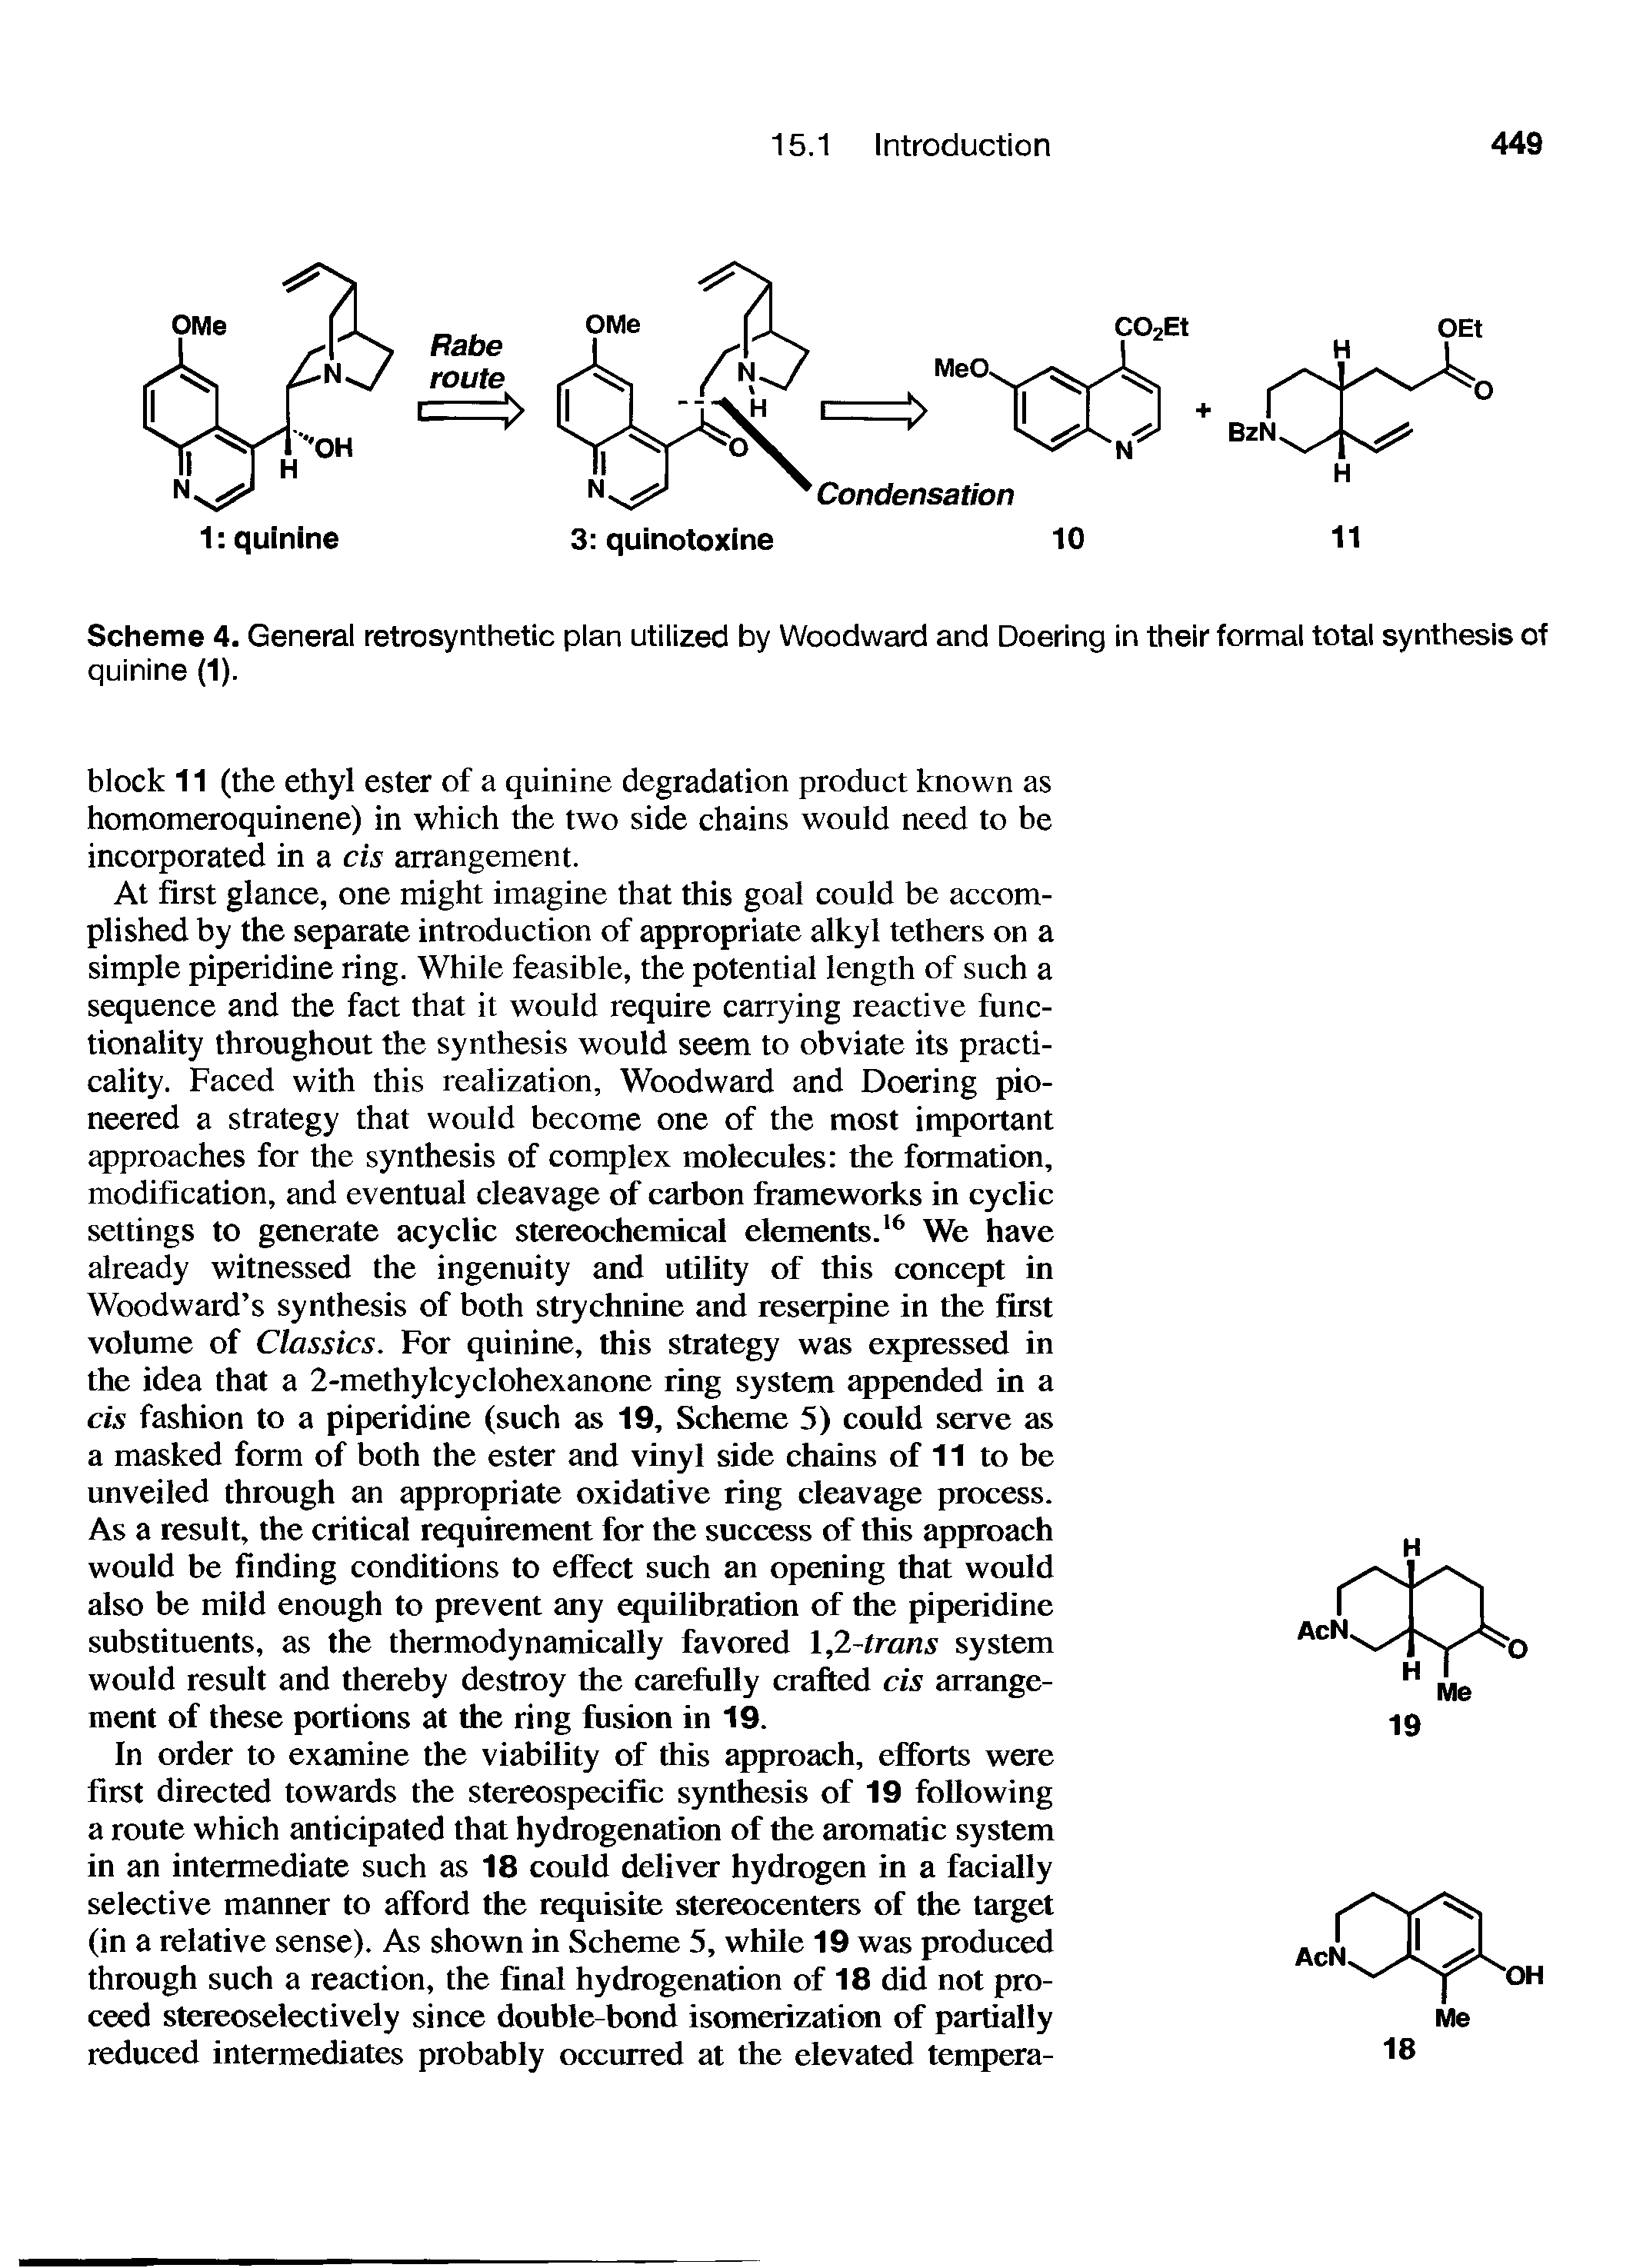 Scheme 4. General retrosynthetic plan utilized by Woodward and Doering in their formal total synthesis of quinine (1).